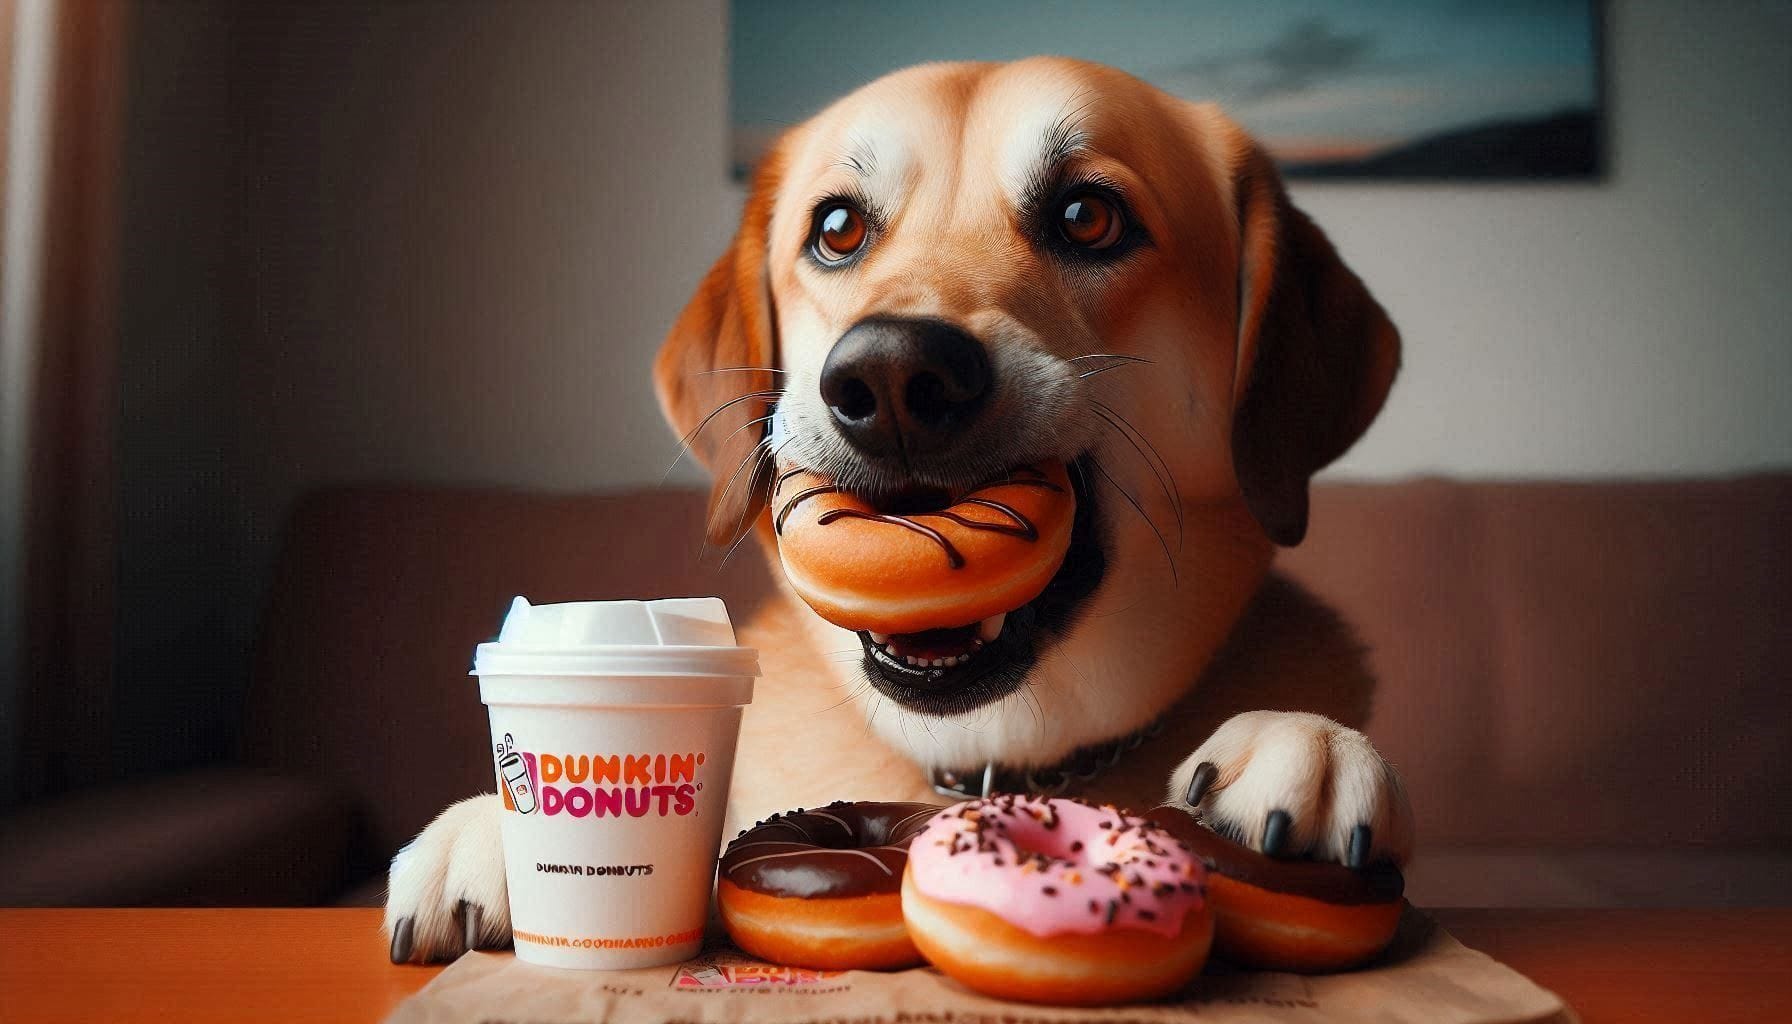 A Dog Eating Dunkin' Donuts